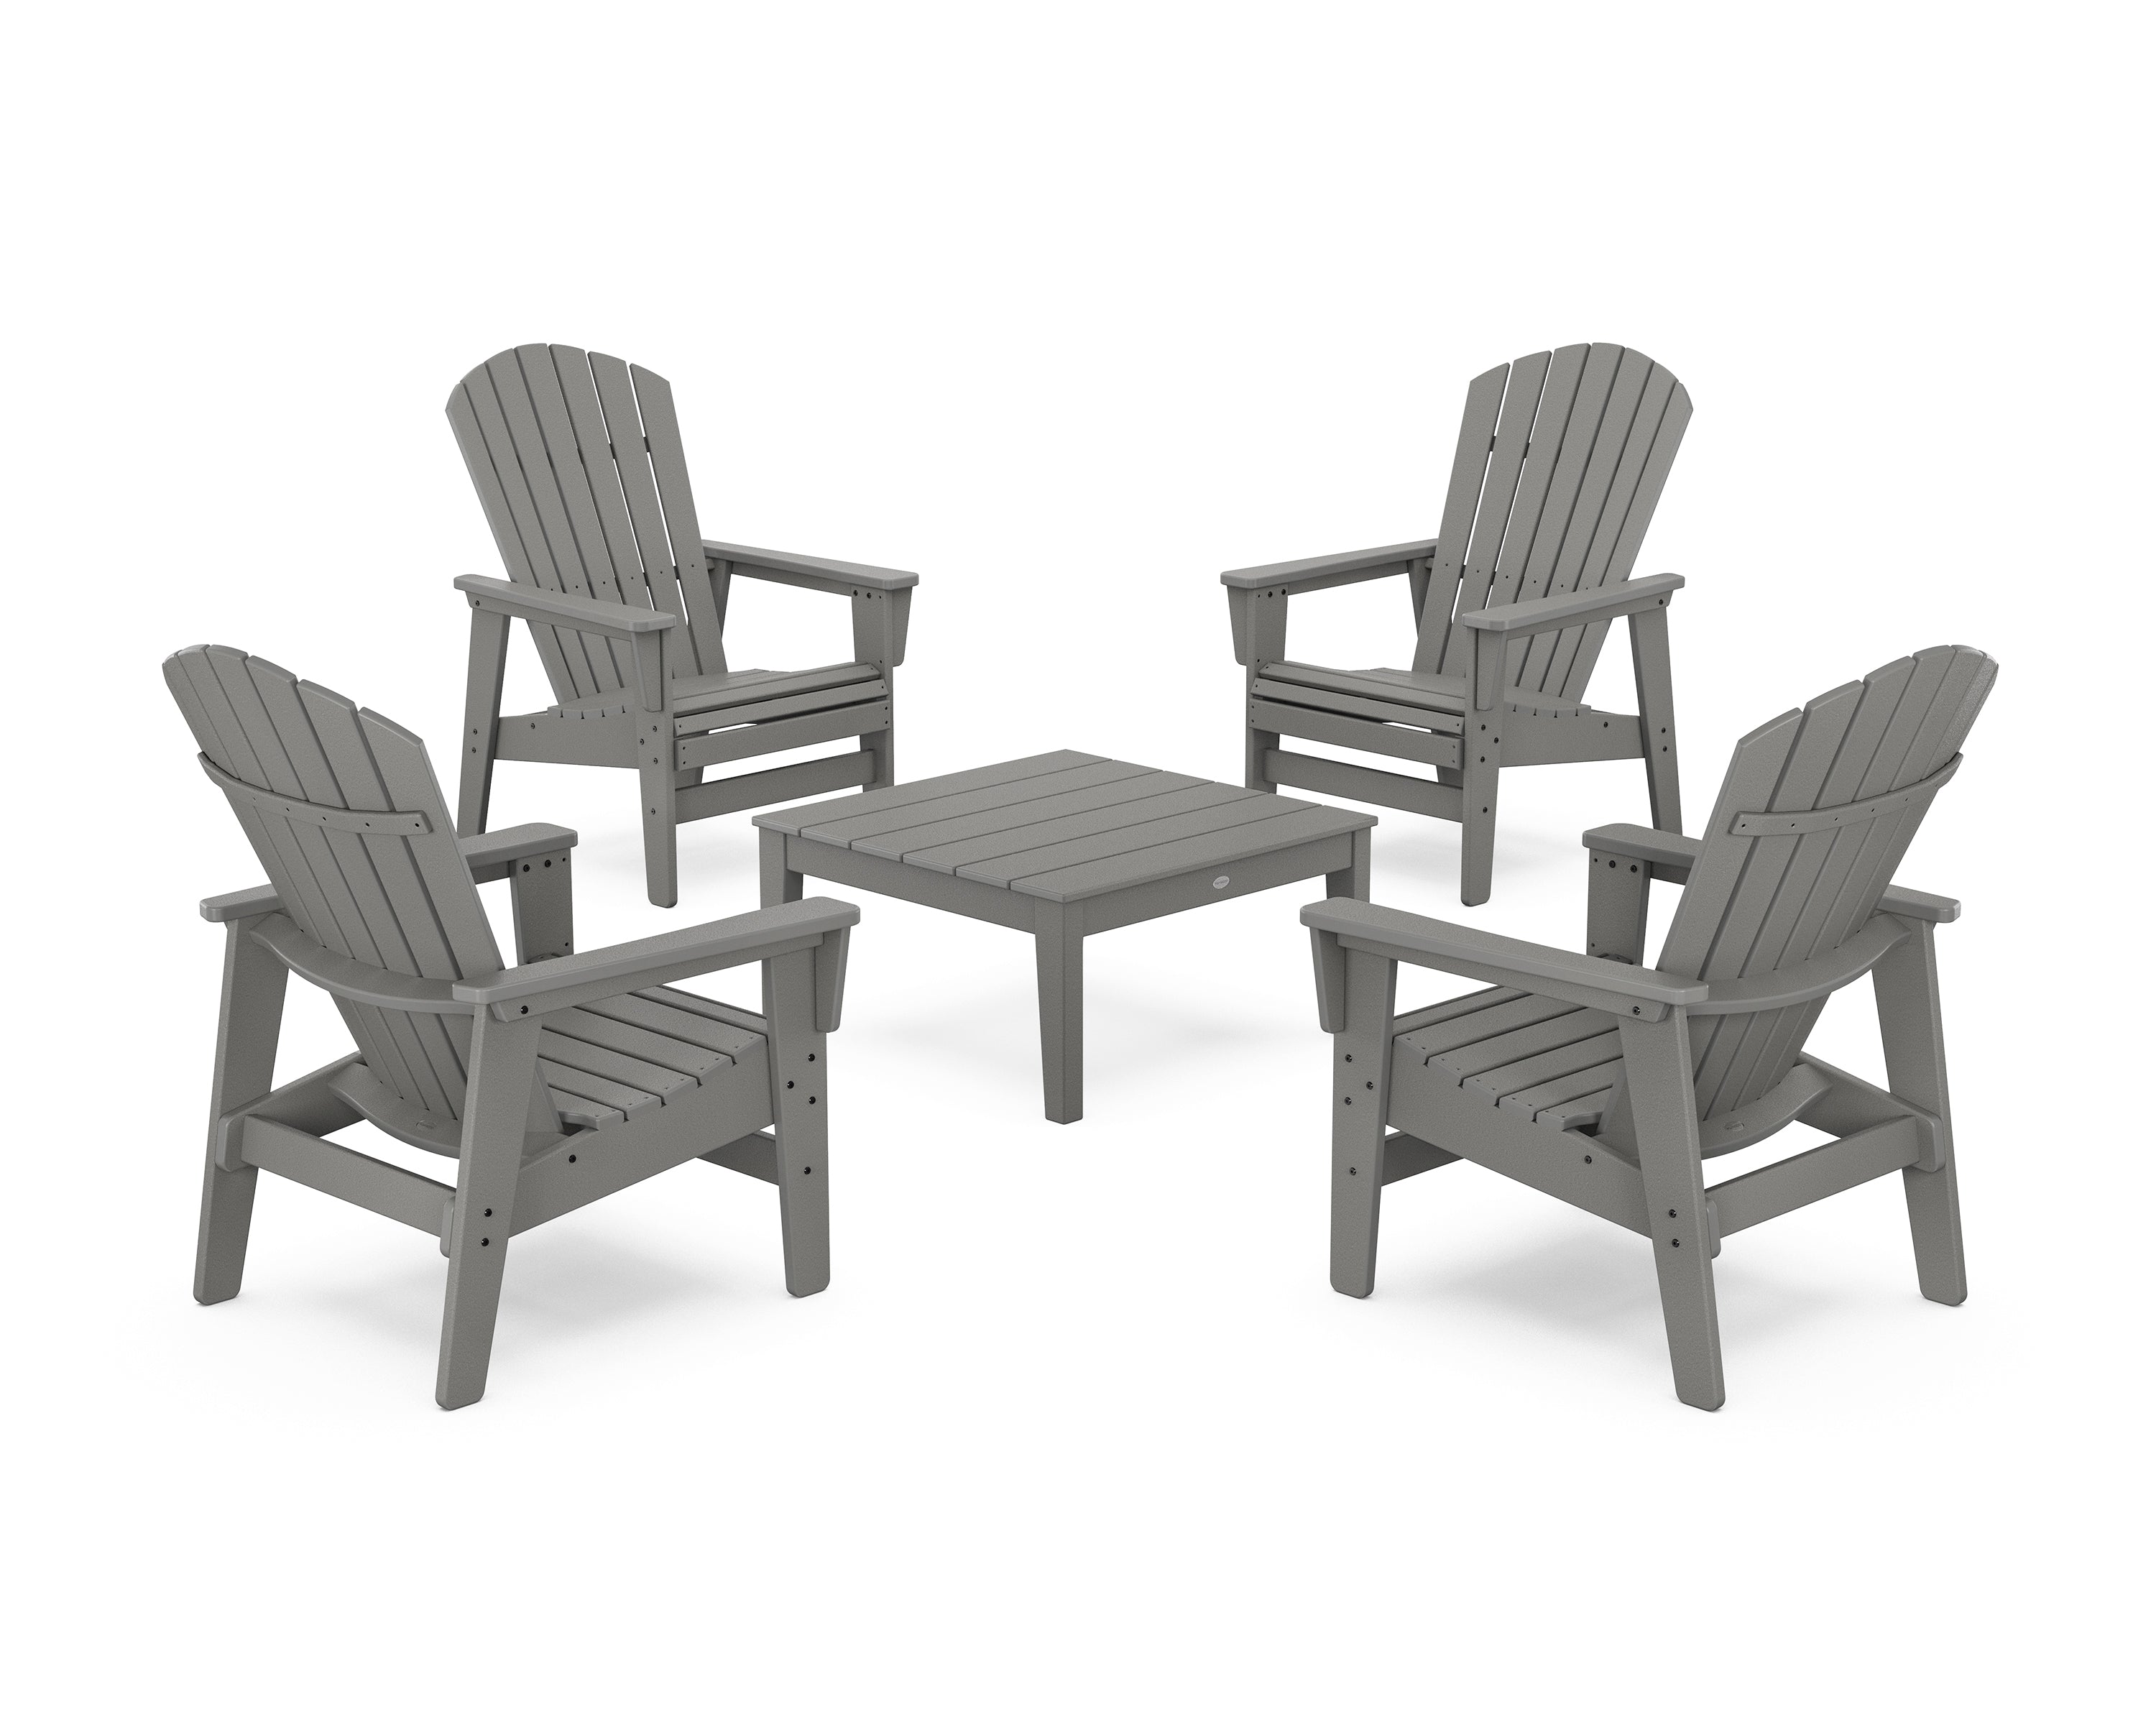 POLYWOOD® 5-Piece Nautical Grand Upright Adirondack Chair Conversation Group in Slate Grey